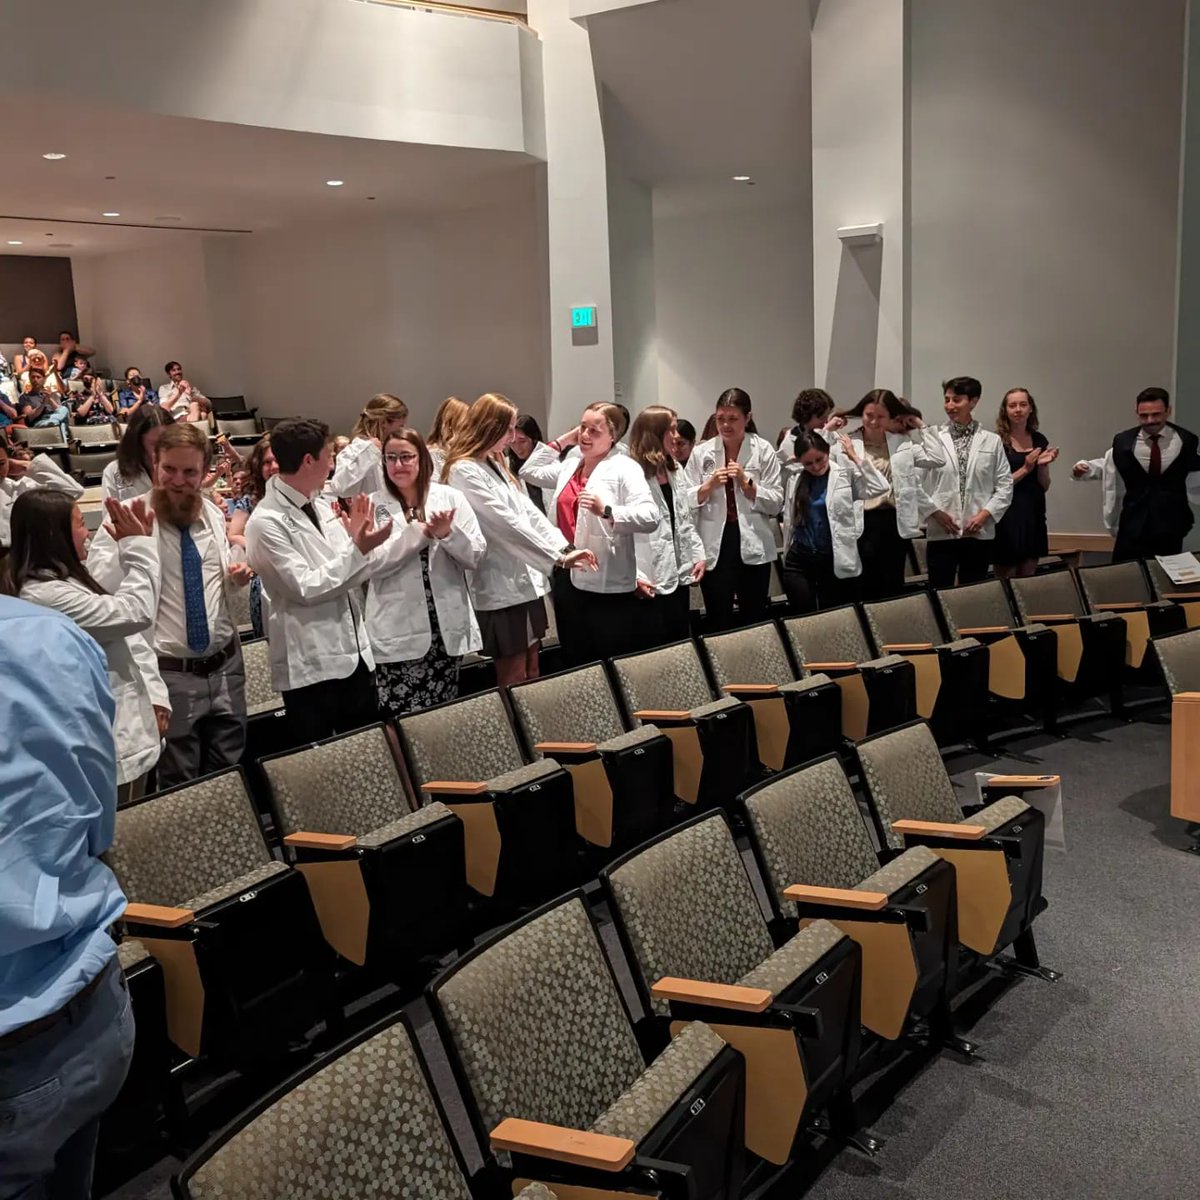 Today our Residential Pathway Class of 2026 officially joined our family, accepted their PT toolkits and white coats, and recited their oaths.